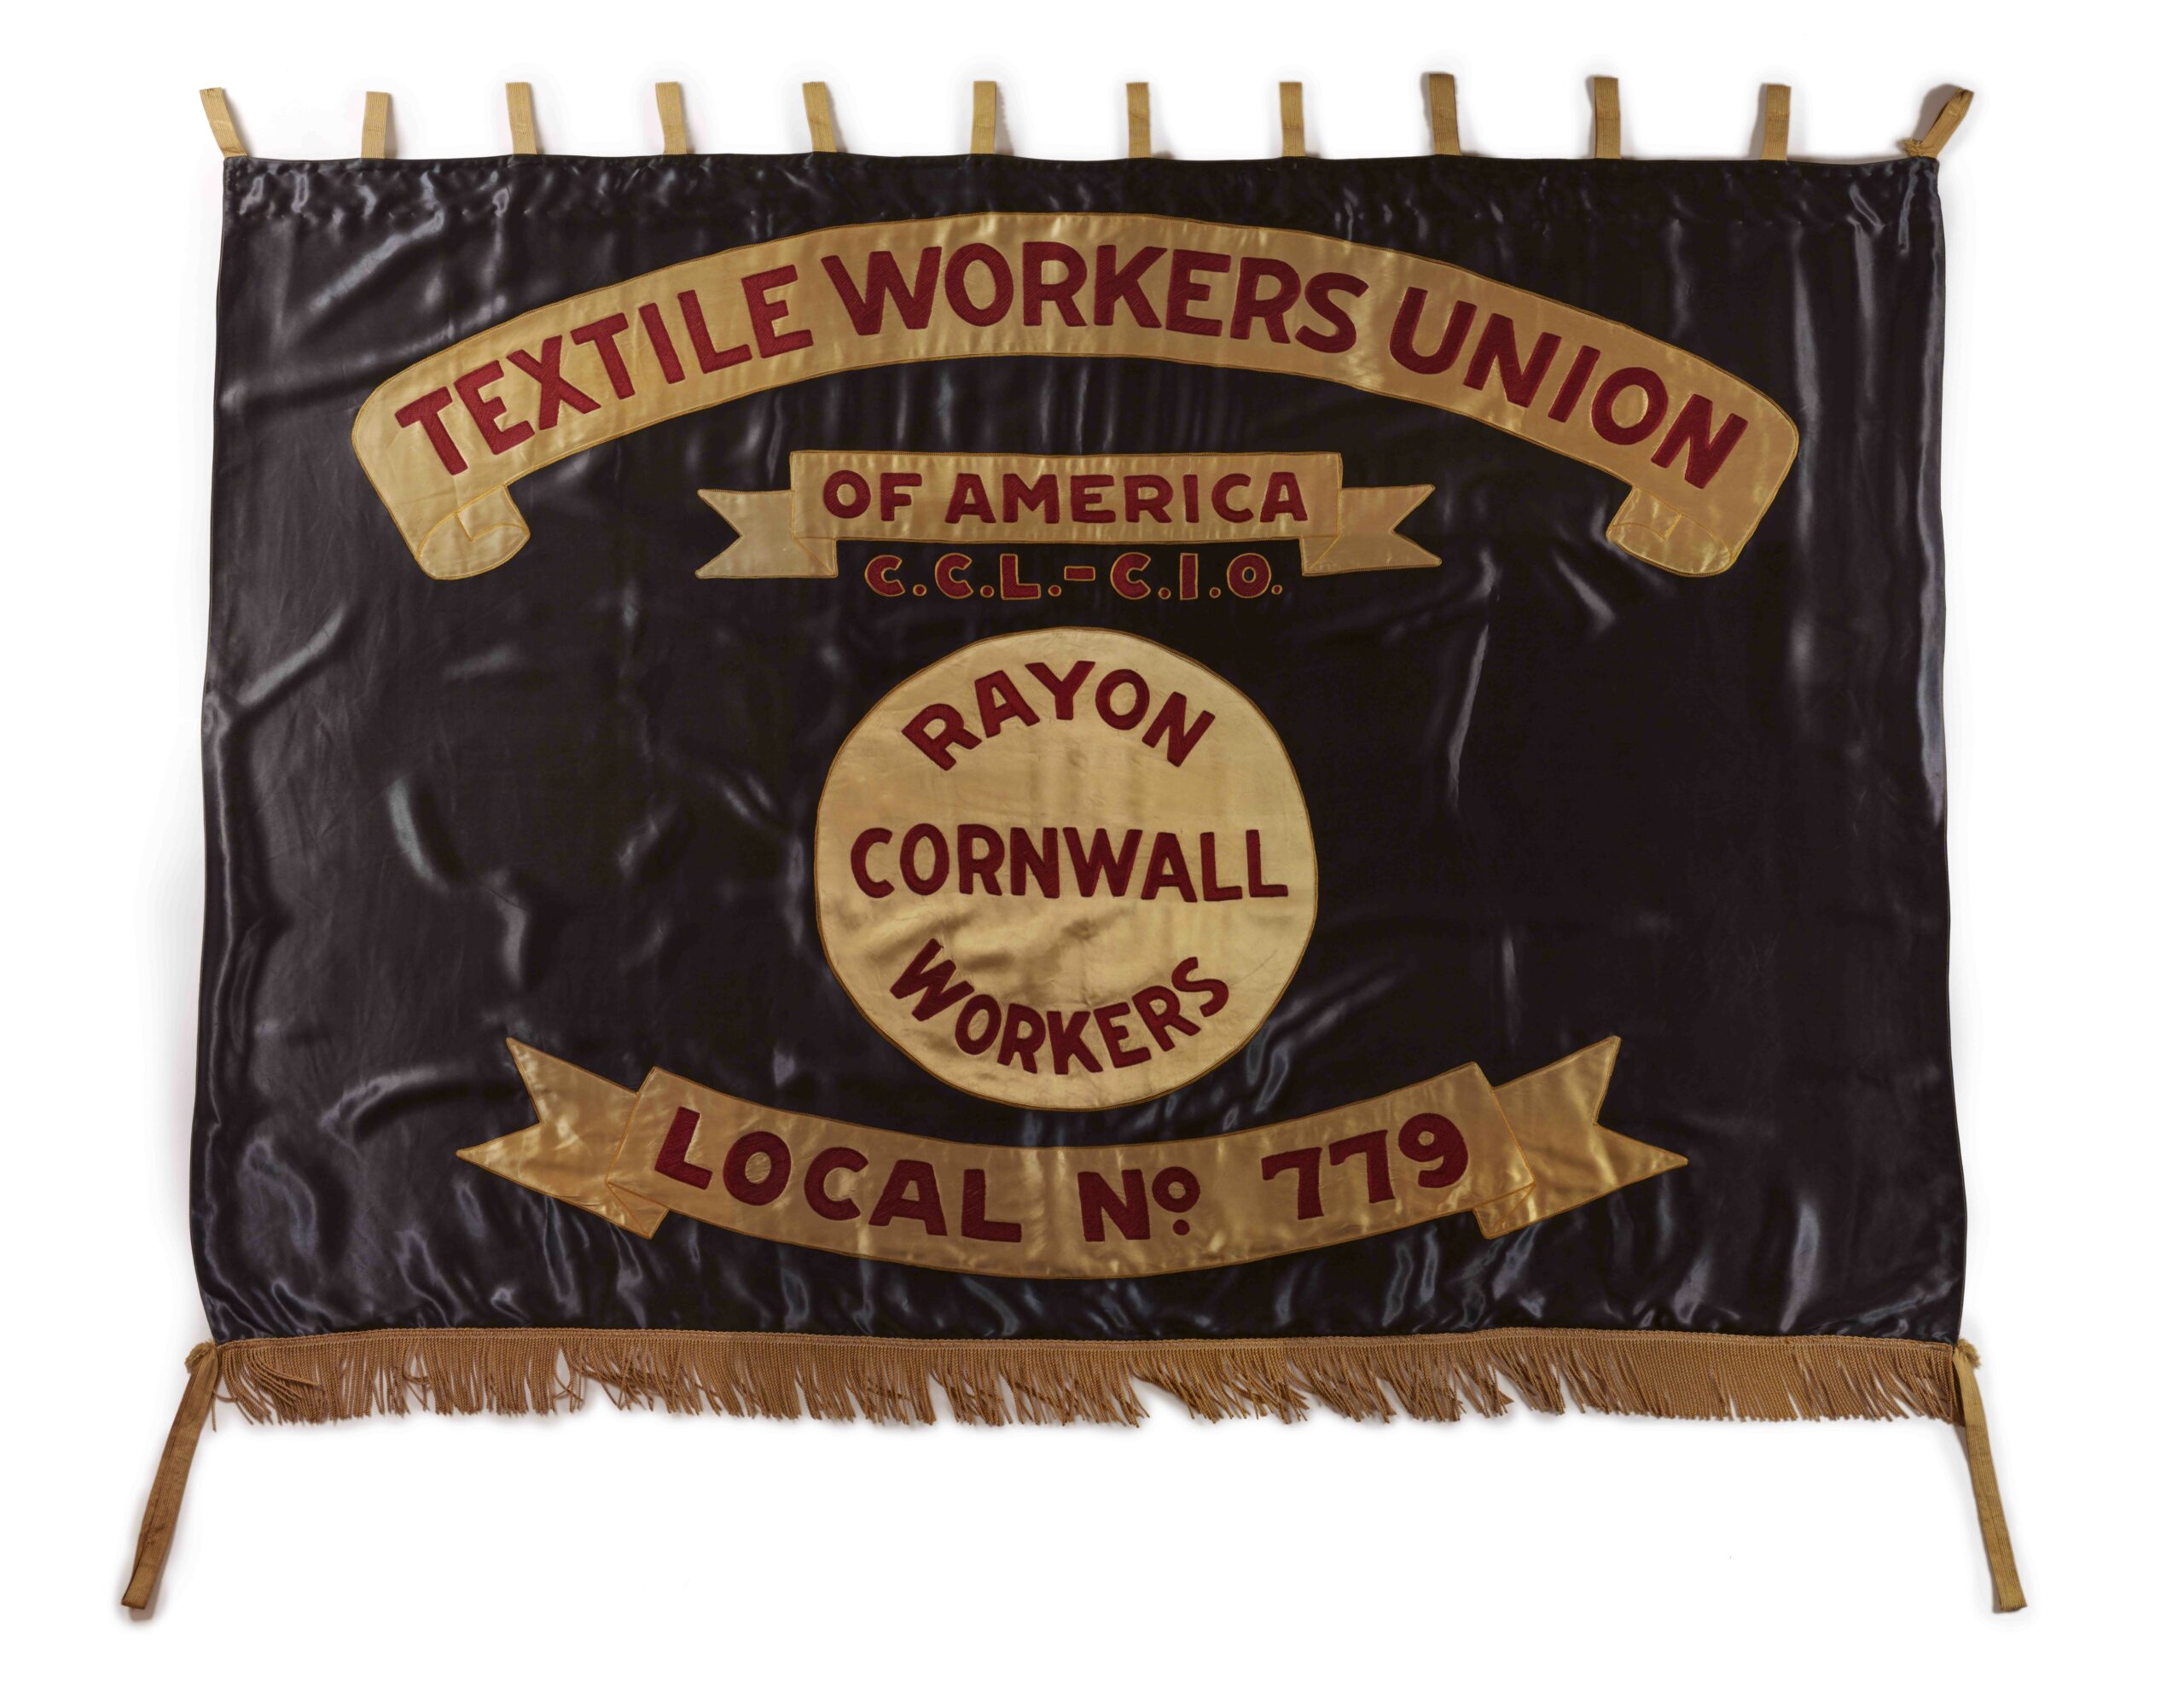 Banner, Textile Workers Union of America, Local 779